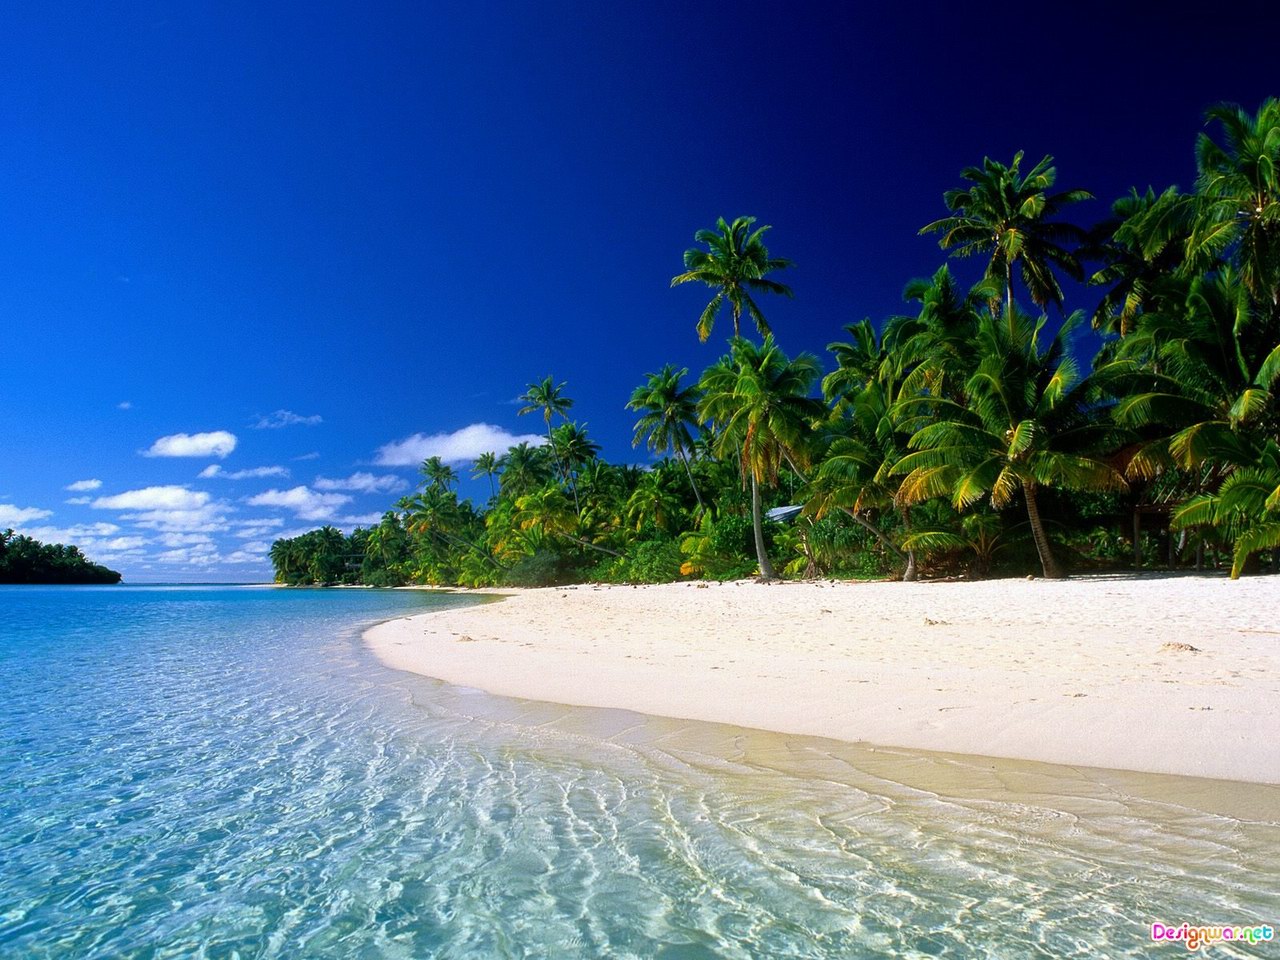 Get Tropical Beach HD Wallpaper And Make This